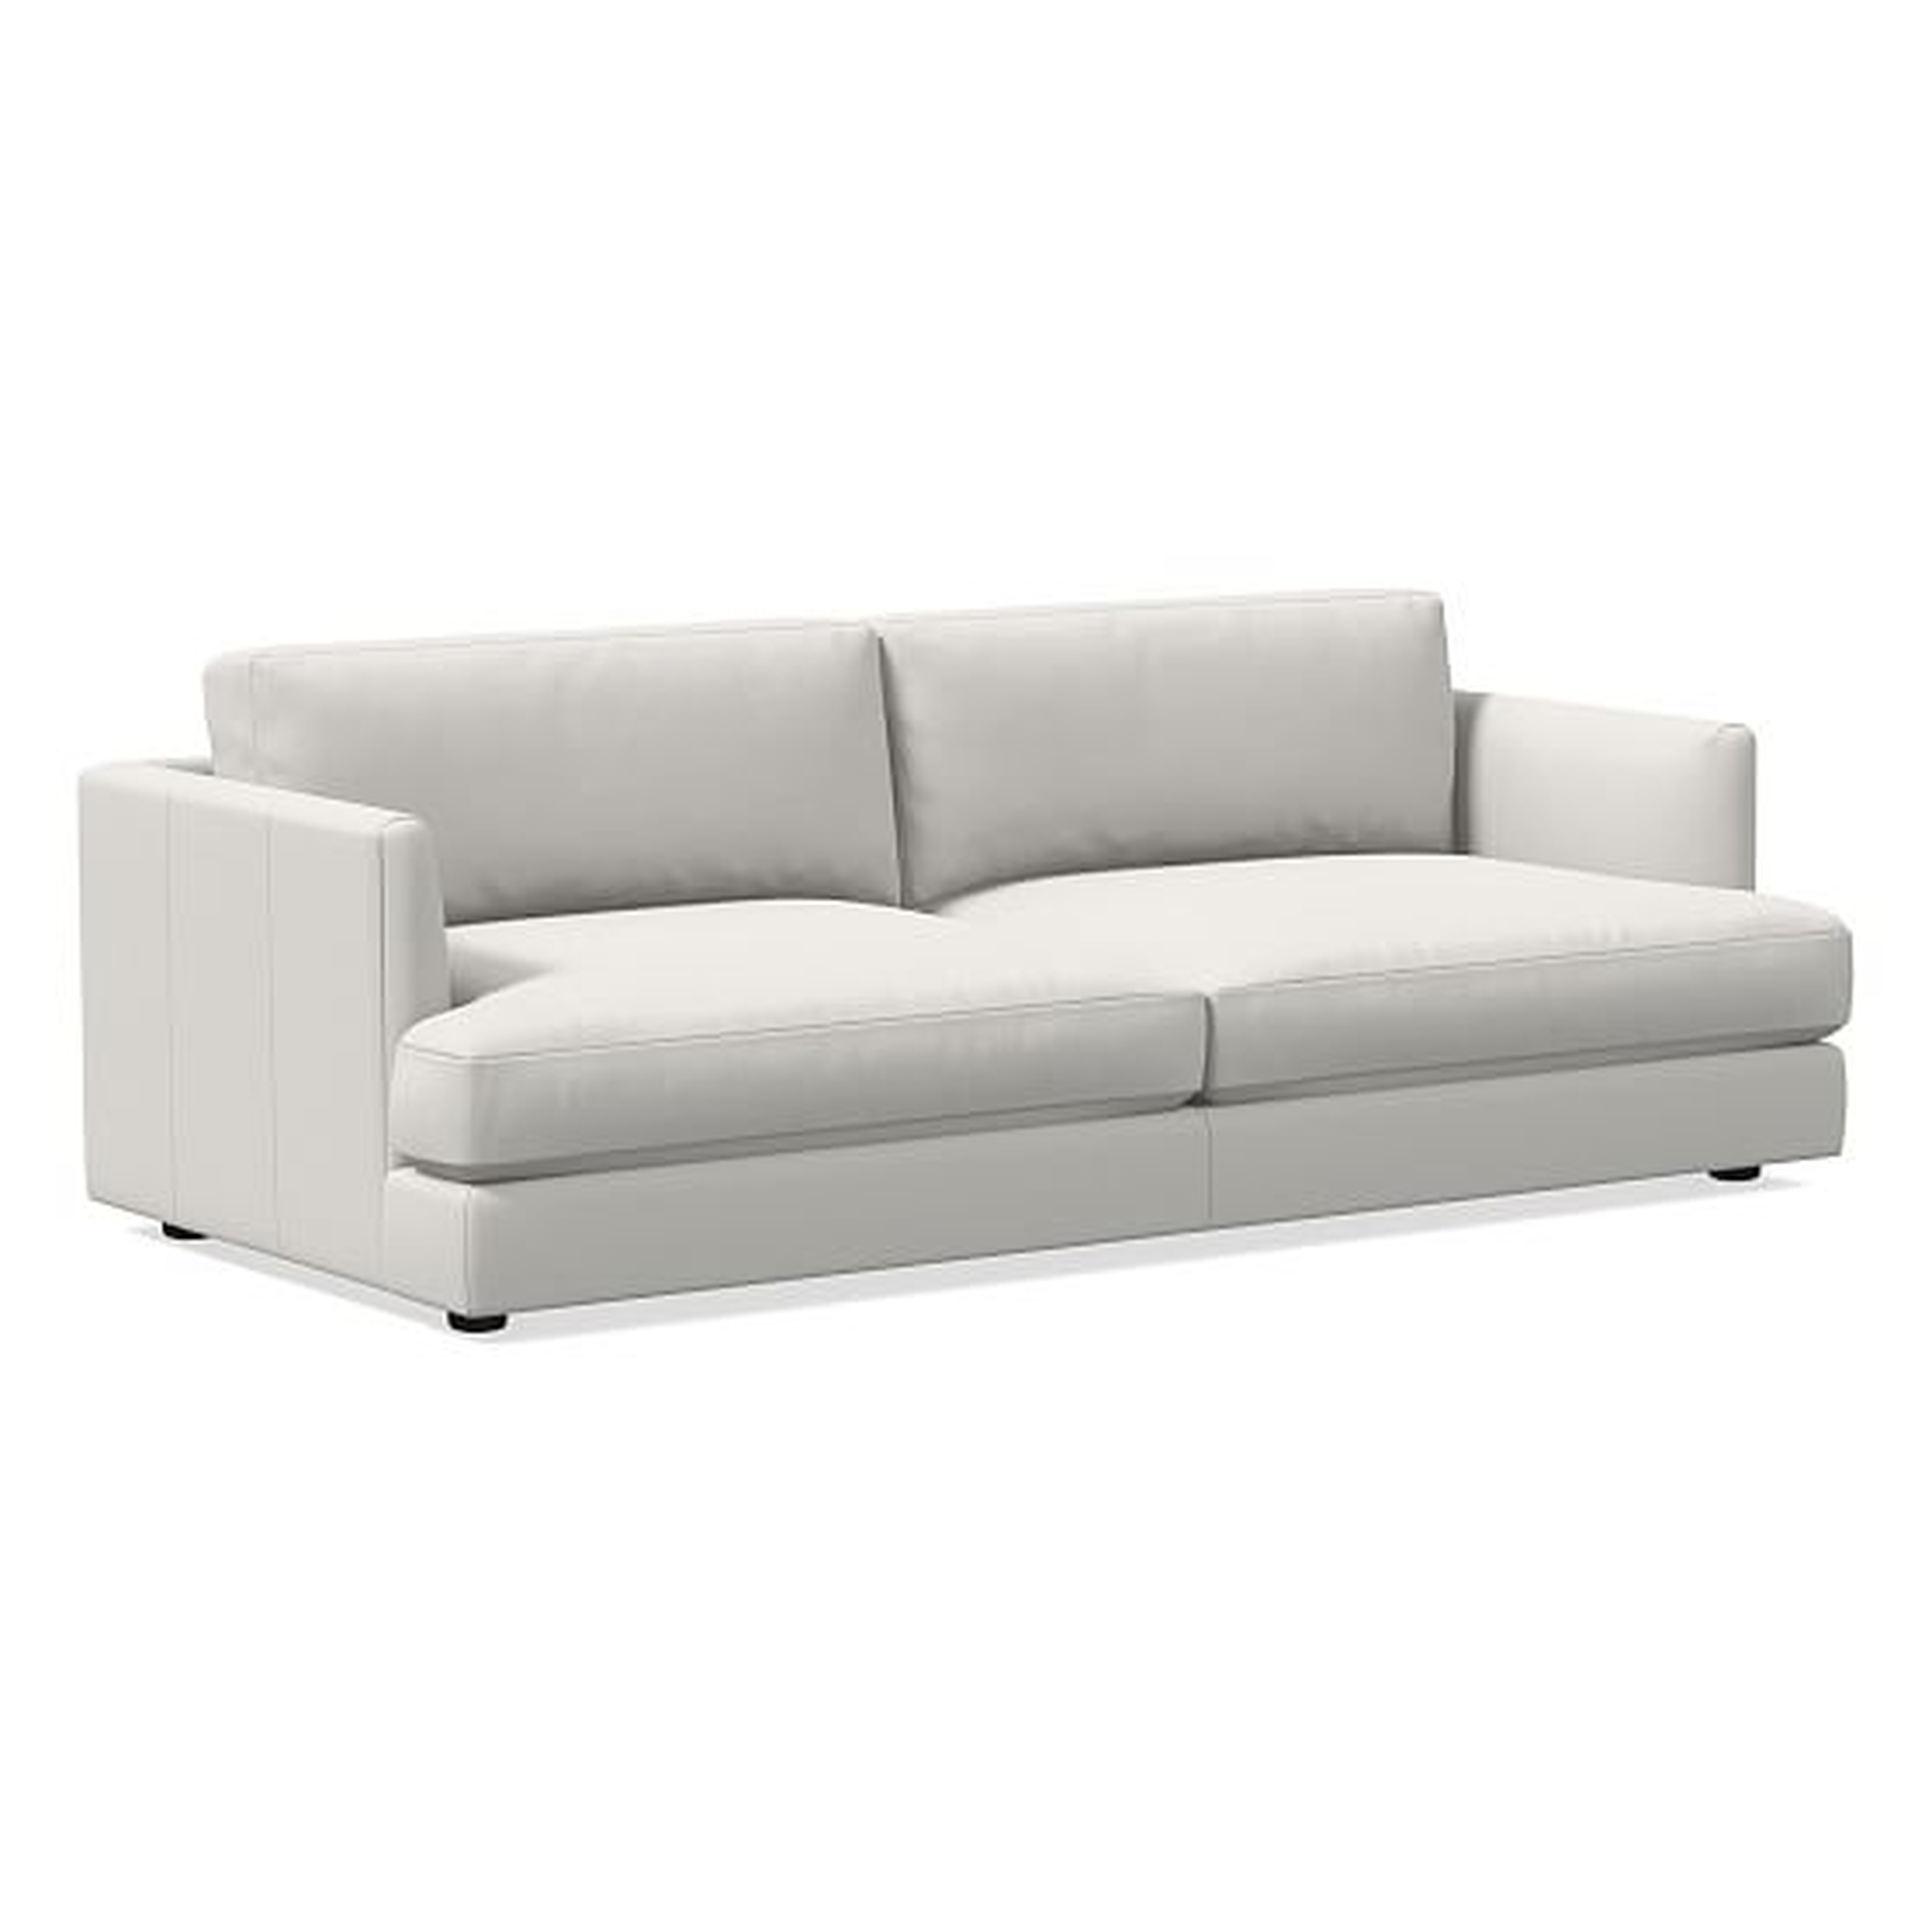 Haven 84" Sofa, Sierra Leather, Snow, Concealed Support - West Elm